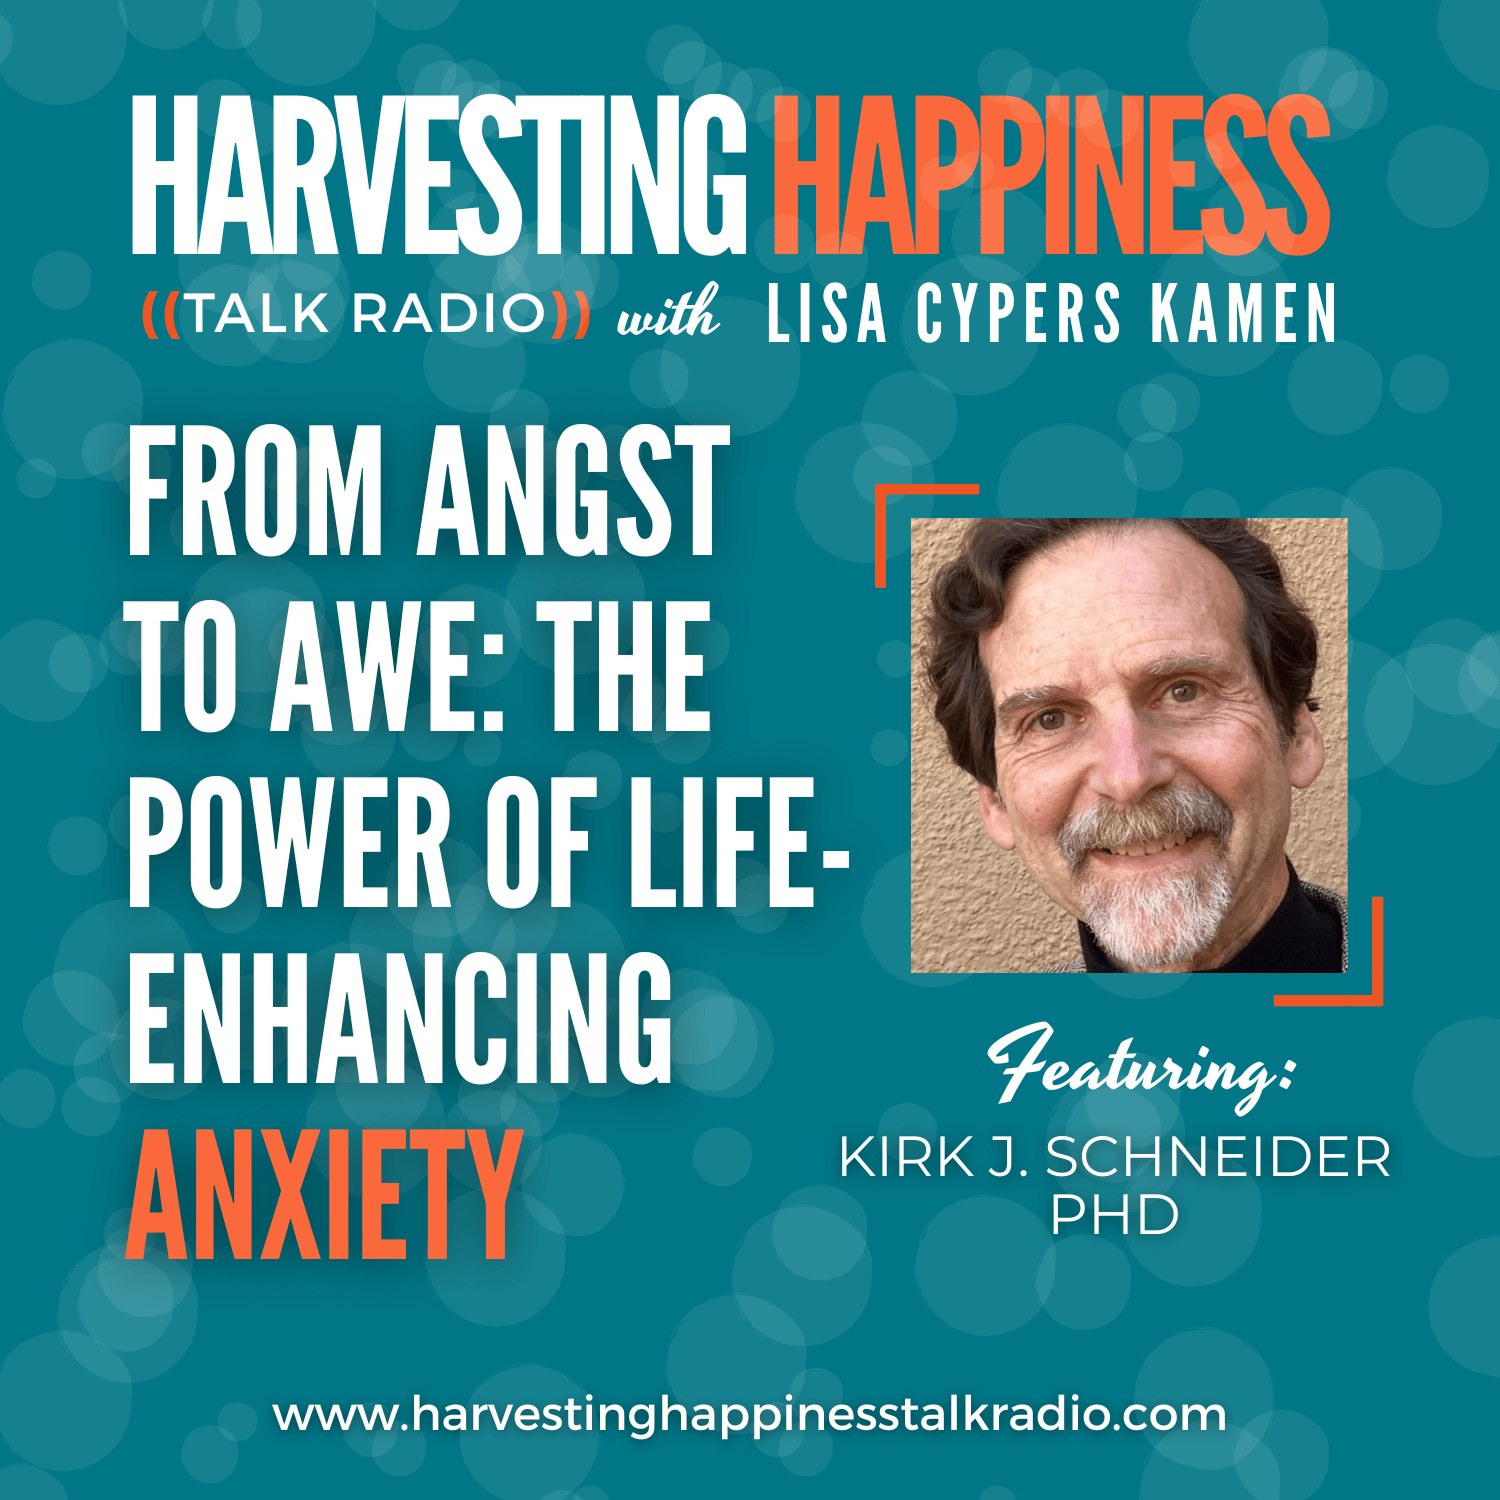 https://harvestinghappinesstalkradio.com/wp-content/uploads/2023/04/Podcast-called-From-Angst-to-Awe-The-Power-of-Life-Enhancing-Anxiety-with-Kirk-J.-Schneider-PhD-2.png